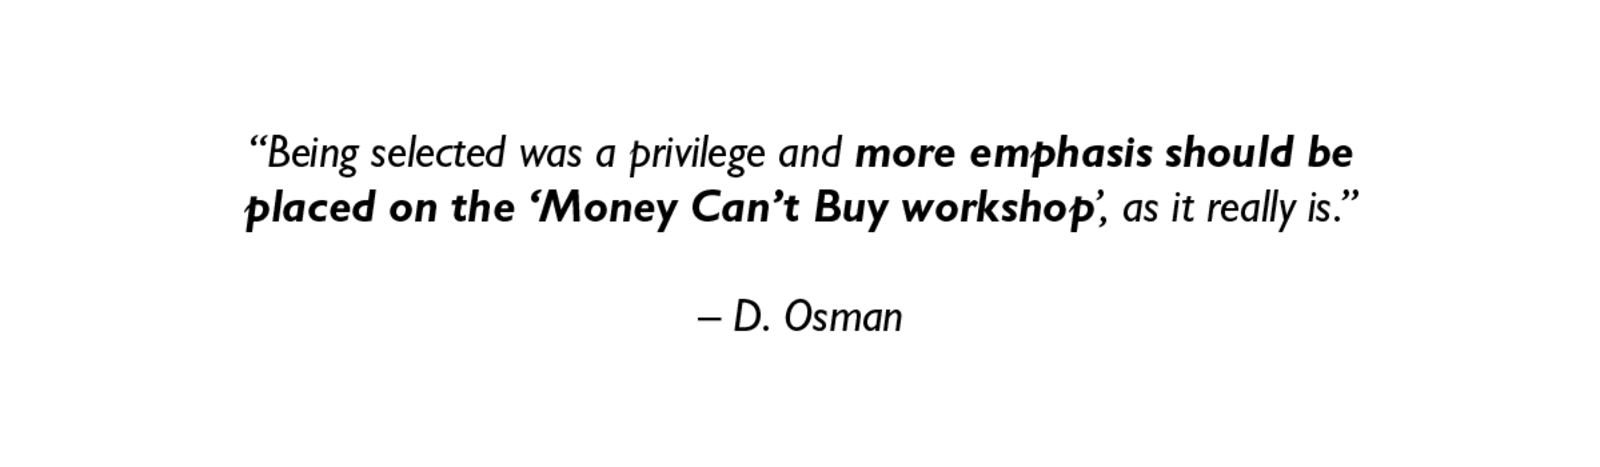 Being selected was a privilege and more emphasis should be placed on the 'Money Can't Buy Workshop', as it really is. - D. Osman